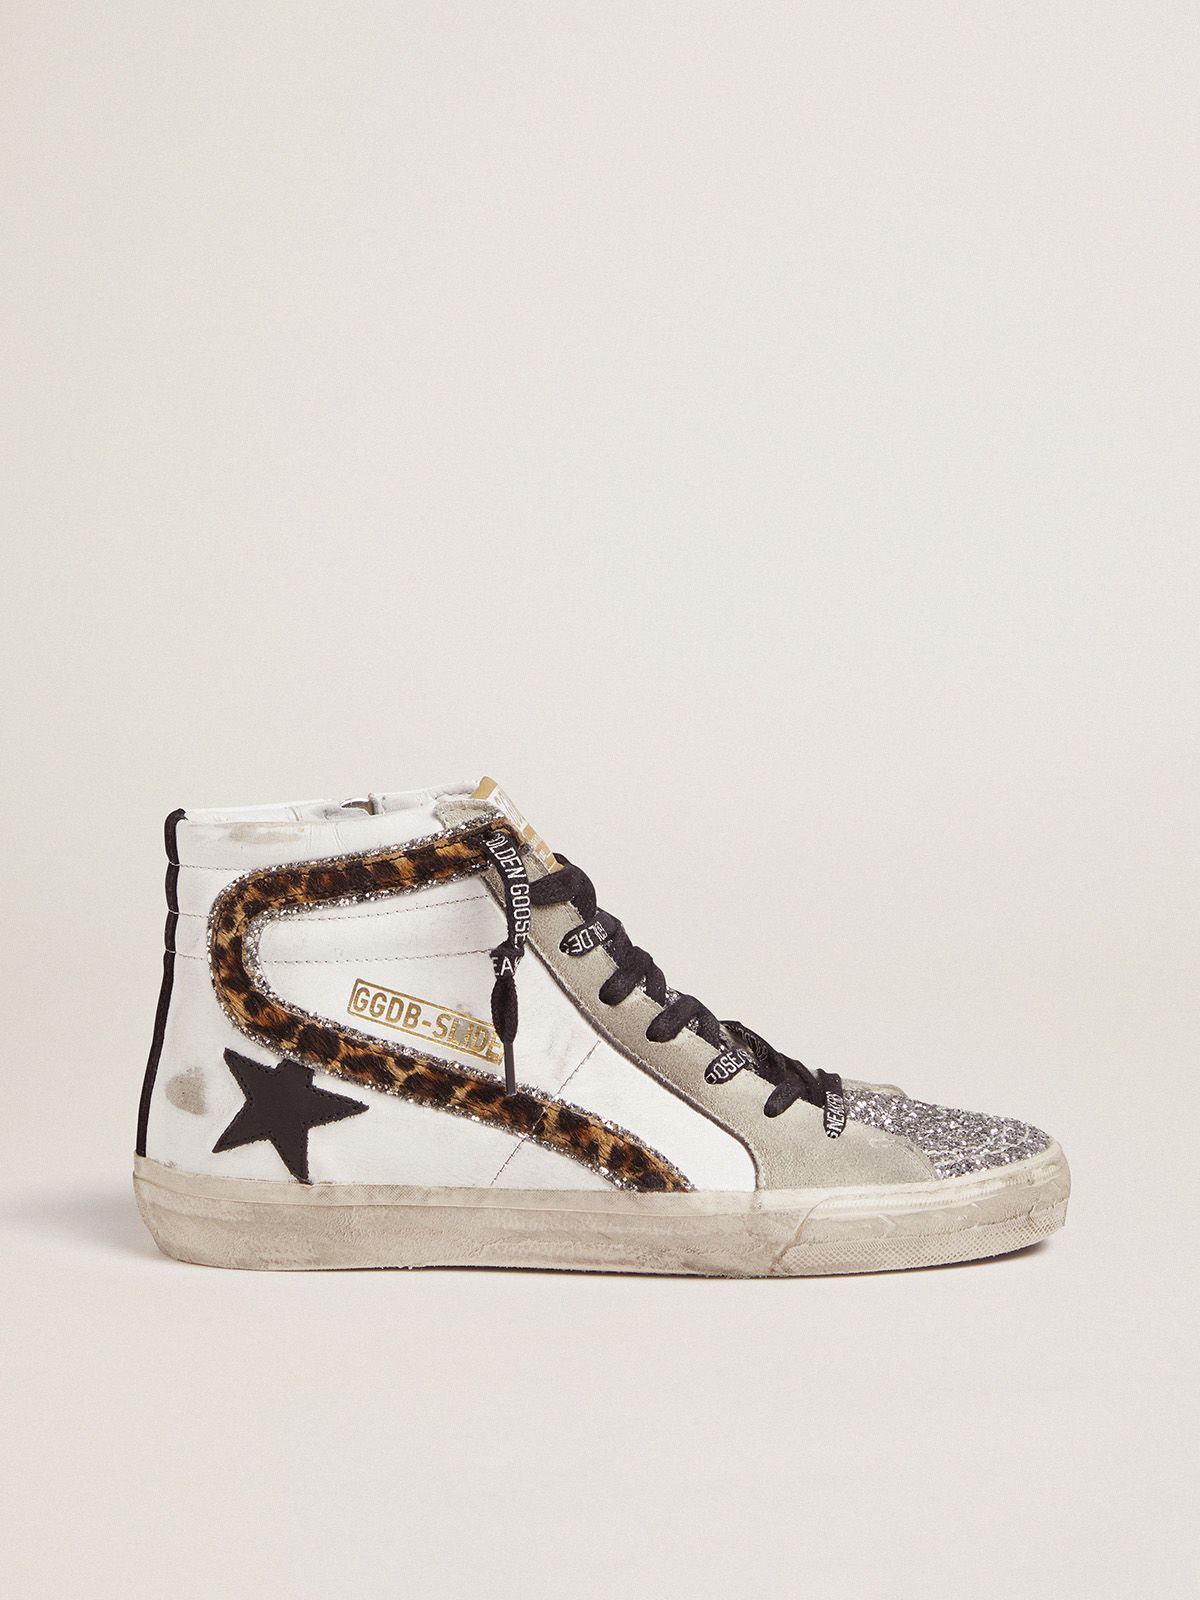 golden goose flash and leopard-print Slide glitter sneakers with